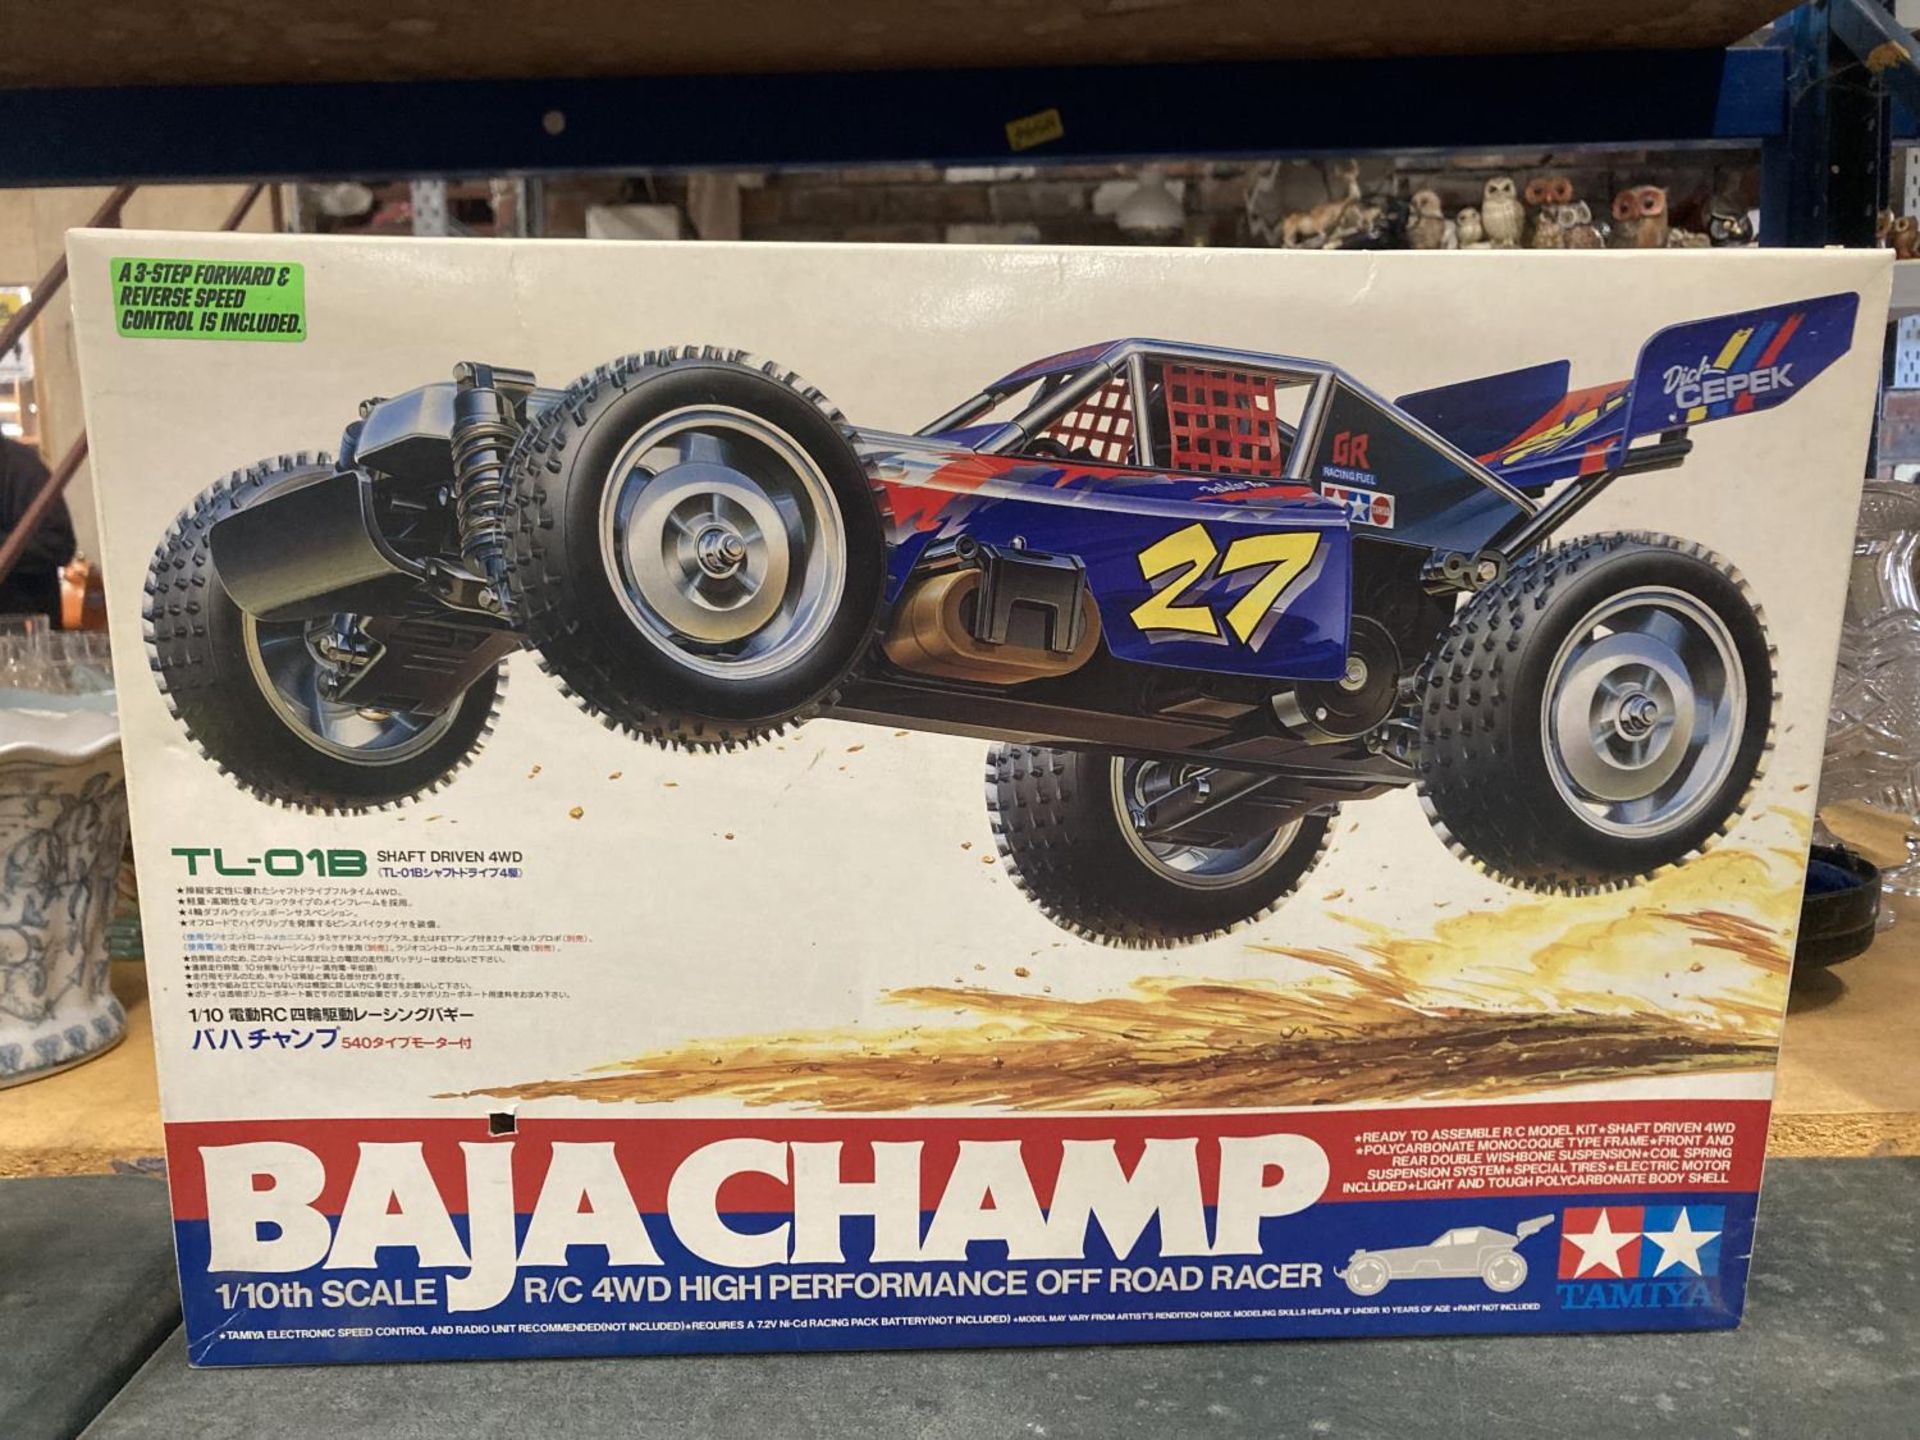 A TAMIYA BAJA CHAMP 1/10TH SCALE R/C 4WD HIGH PERFORMANCE OFF ROAD RACER (NO CONTROLLER PRESENT) - Image 8 of 8